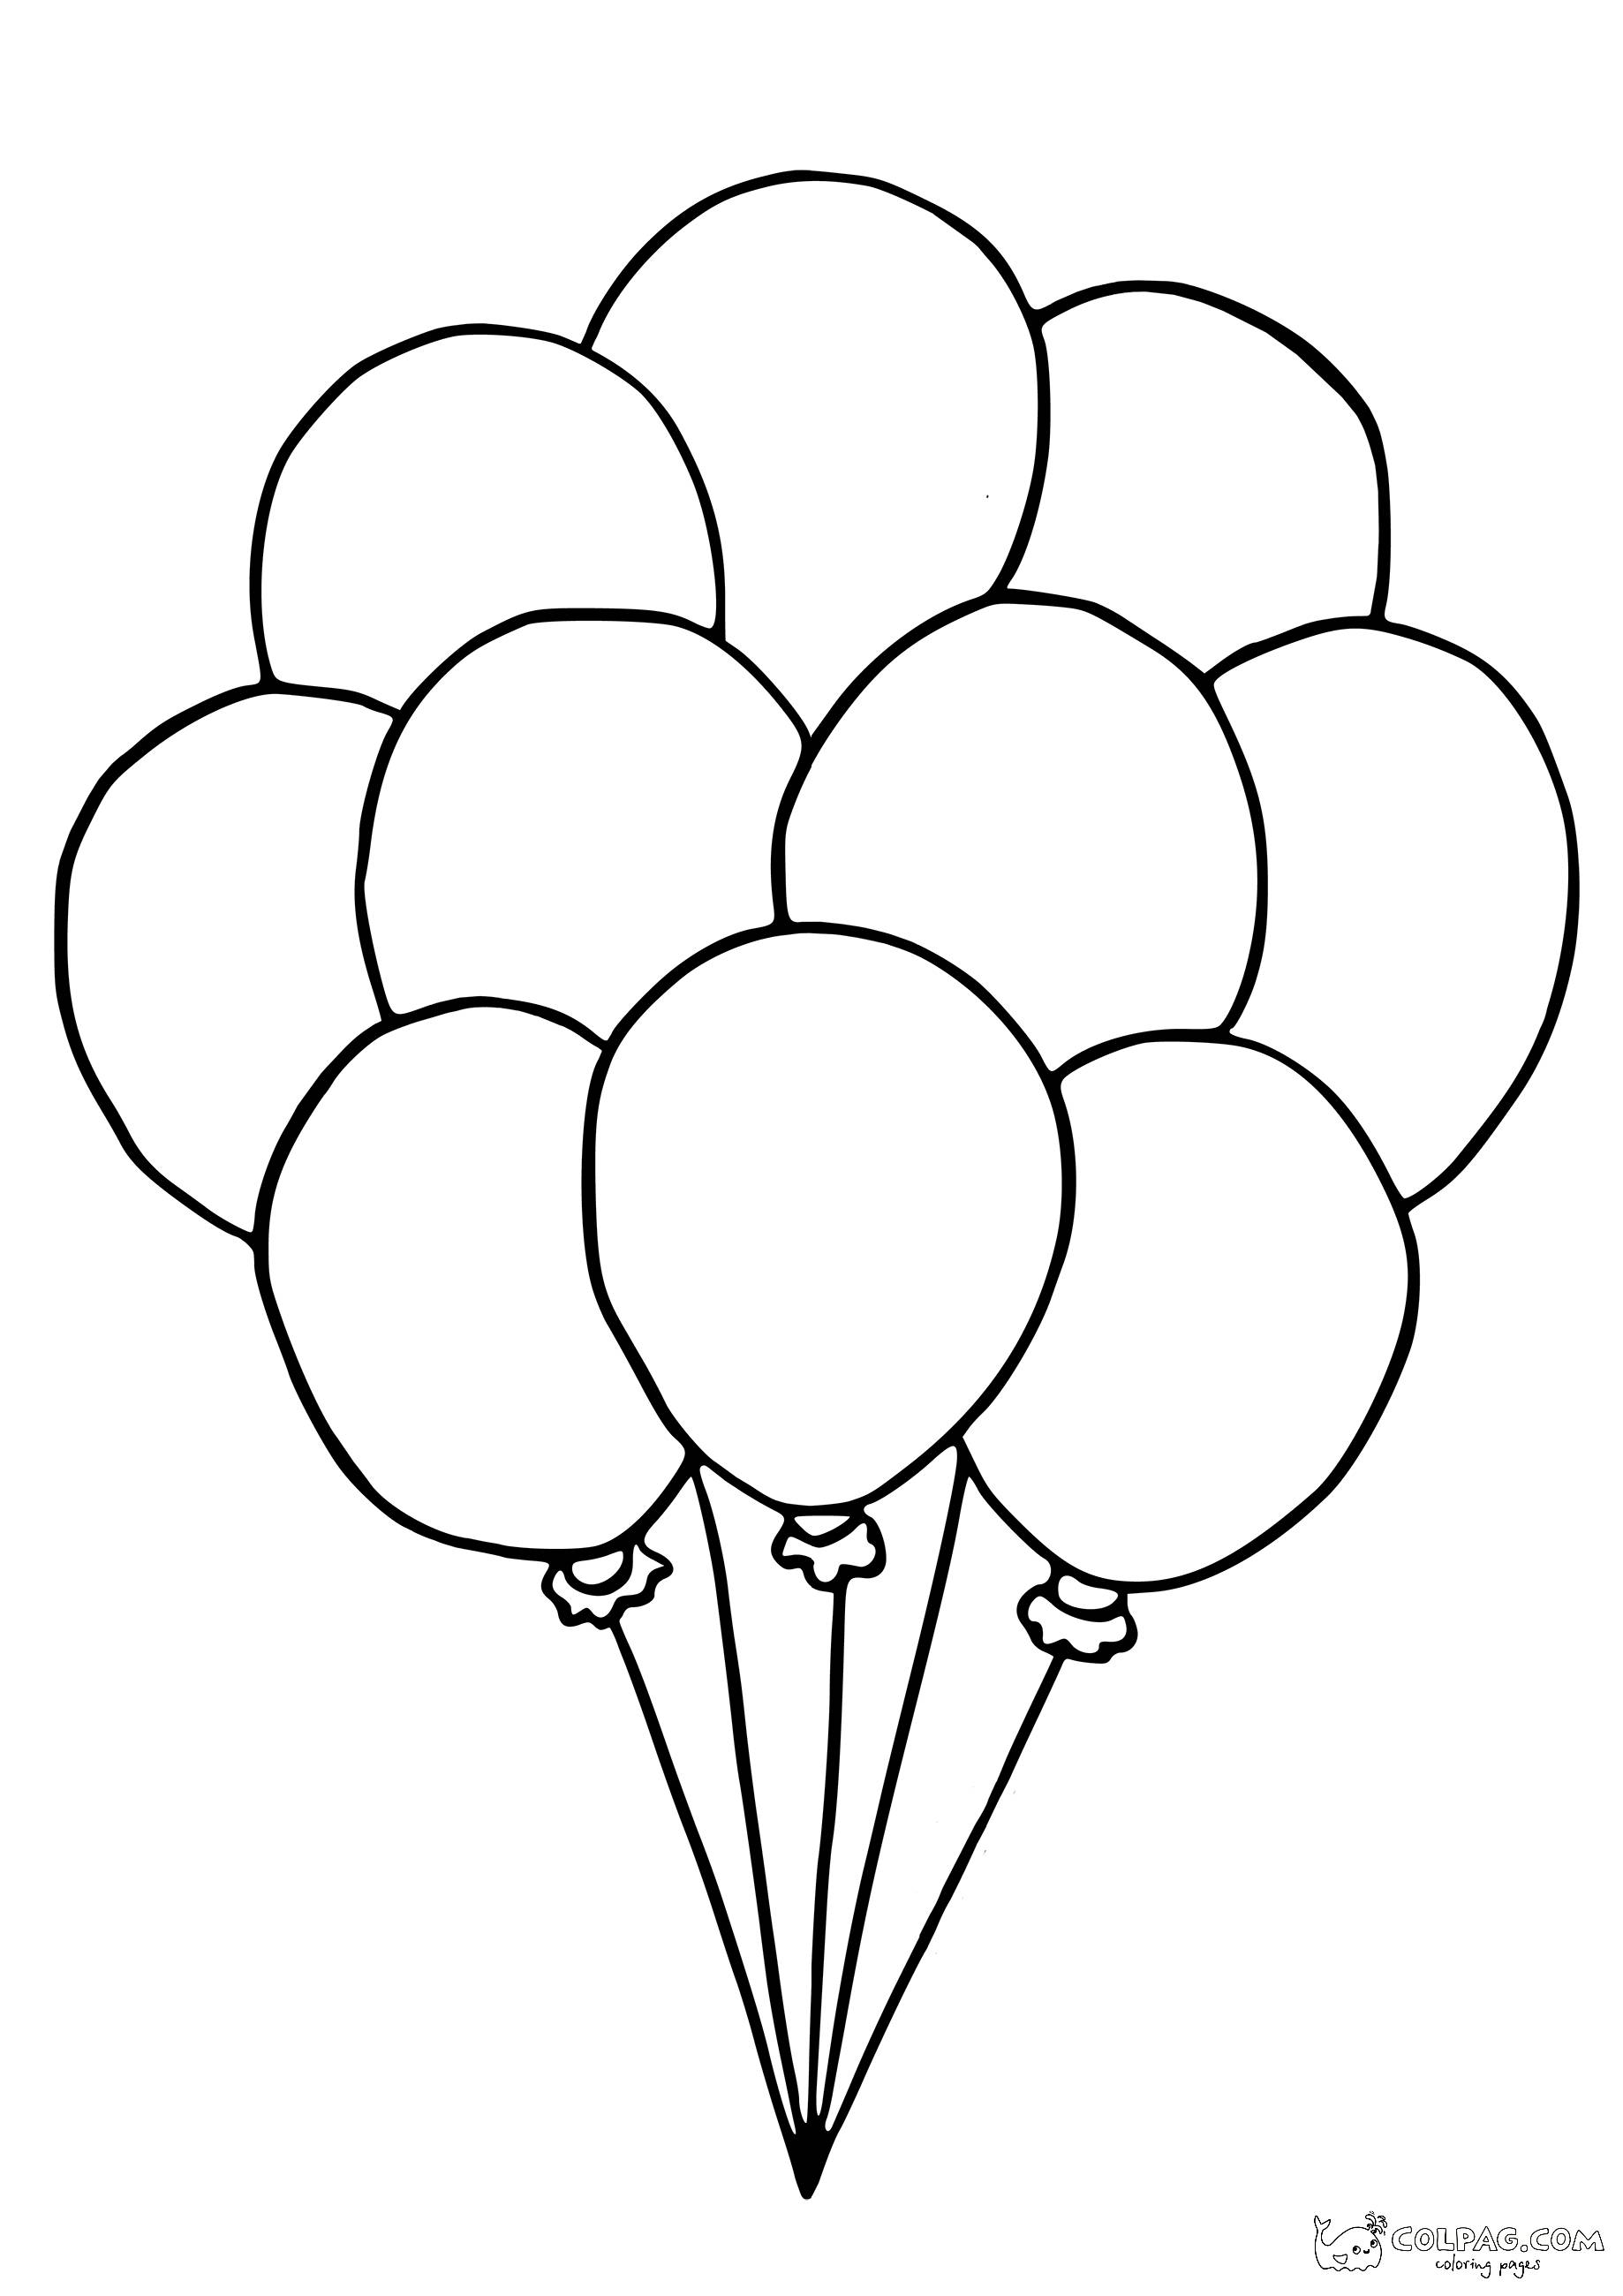 15-lots-of-baloons-together-coloring-page-colpag-15